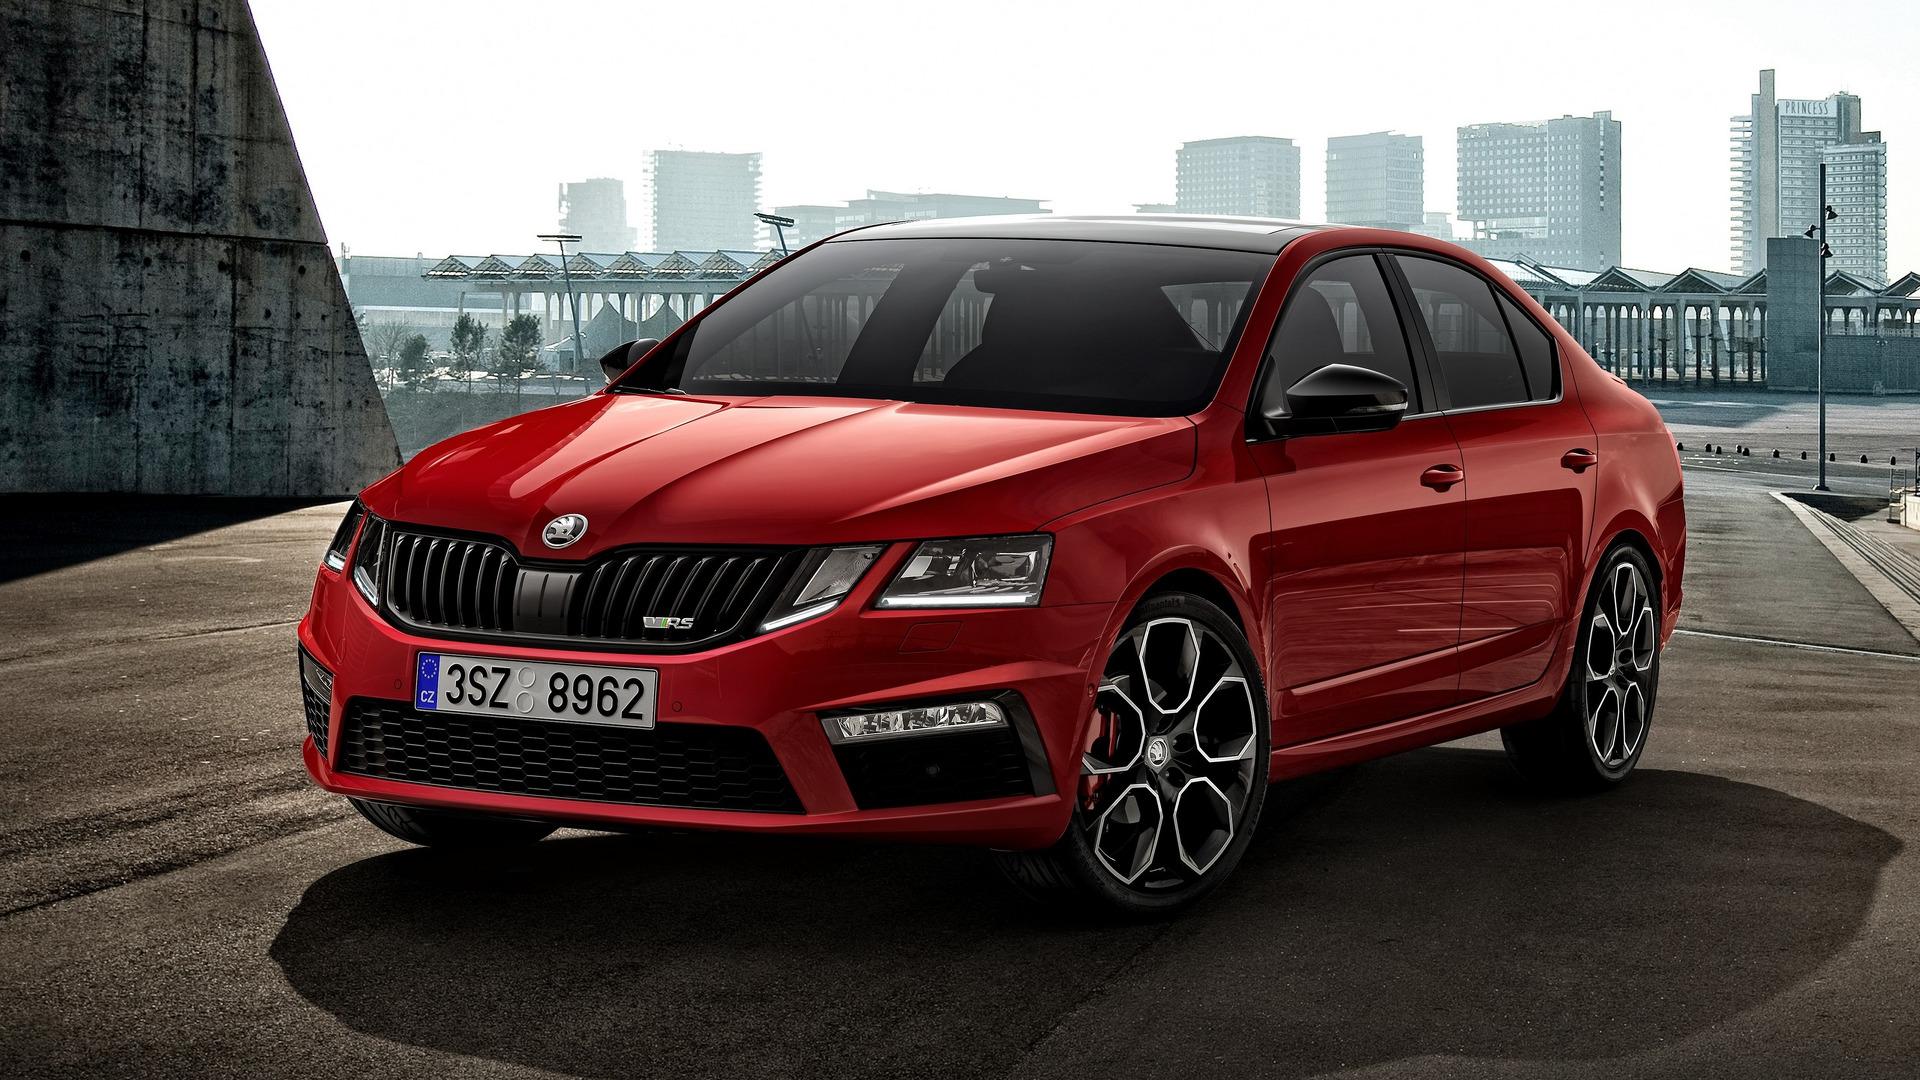 Skoda Says New Octavia Will Be State Of